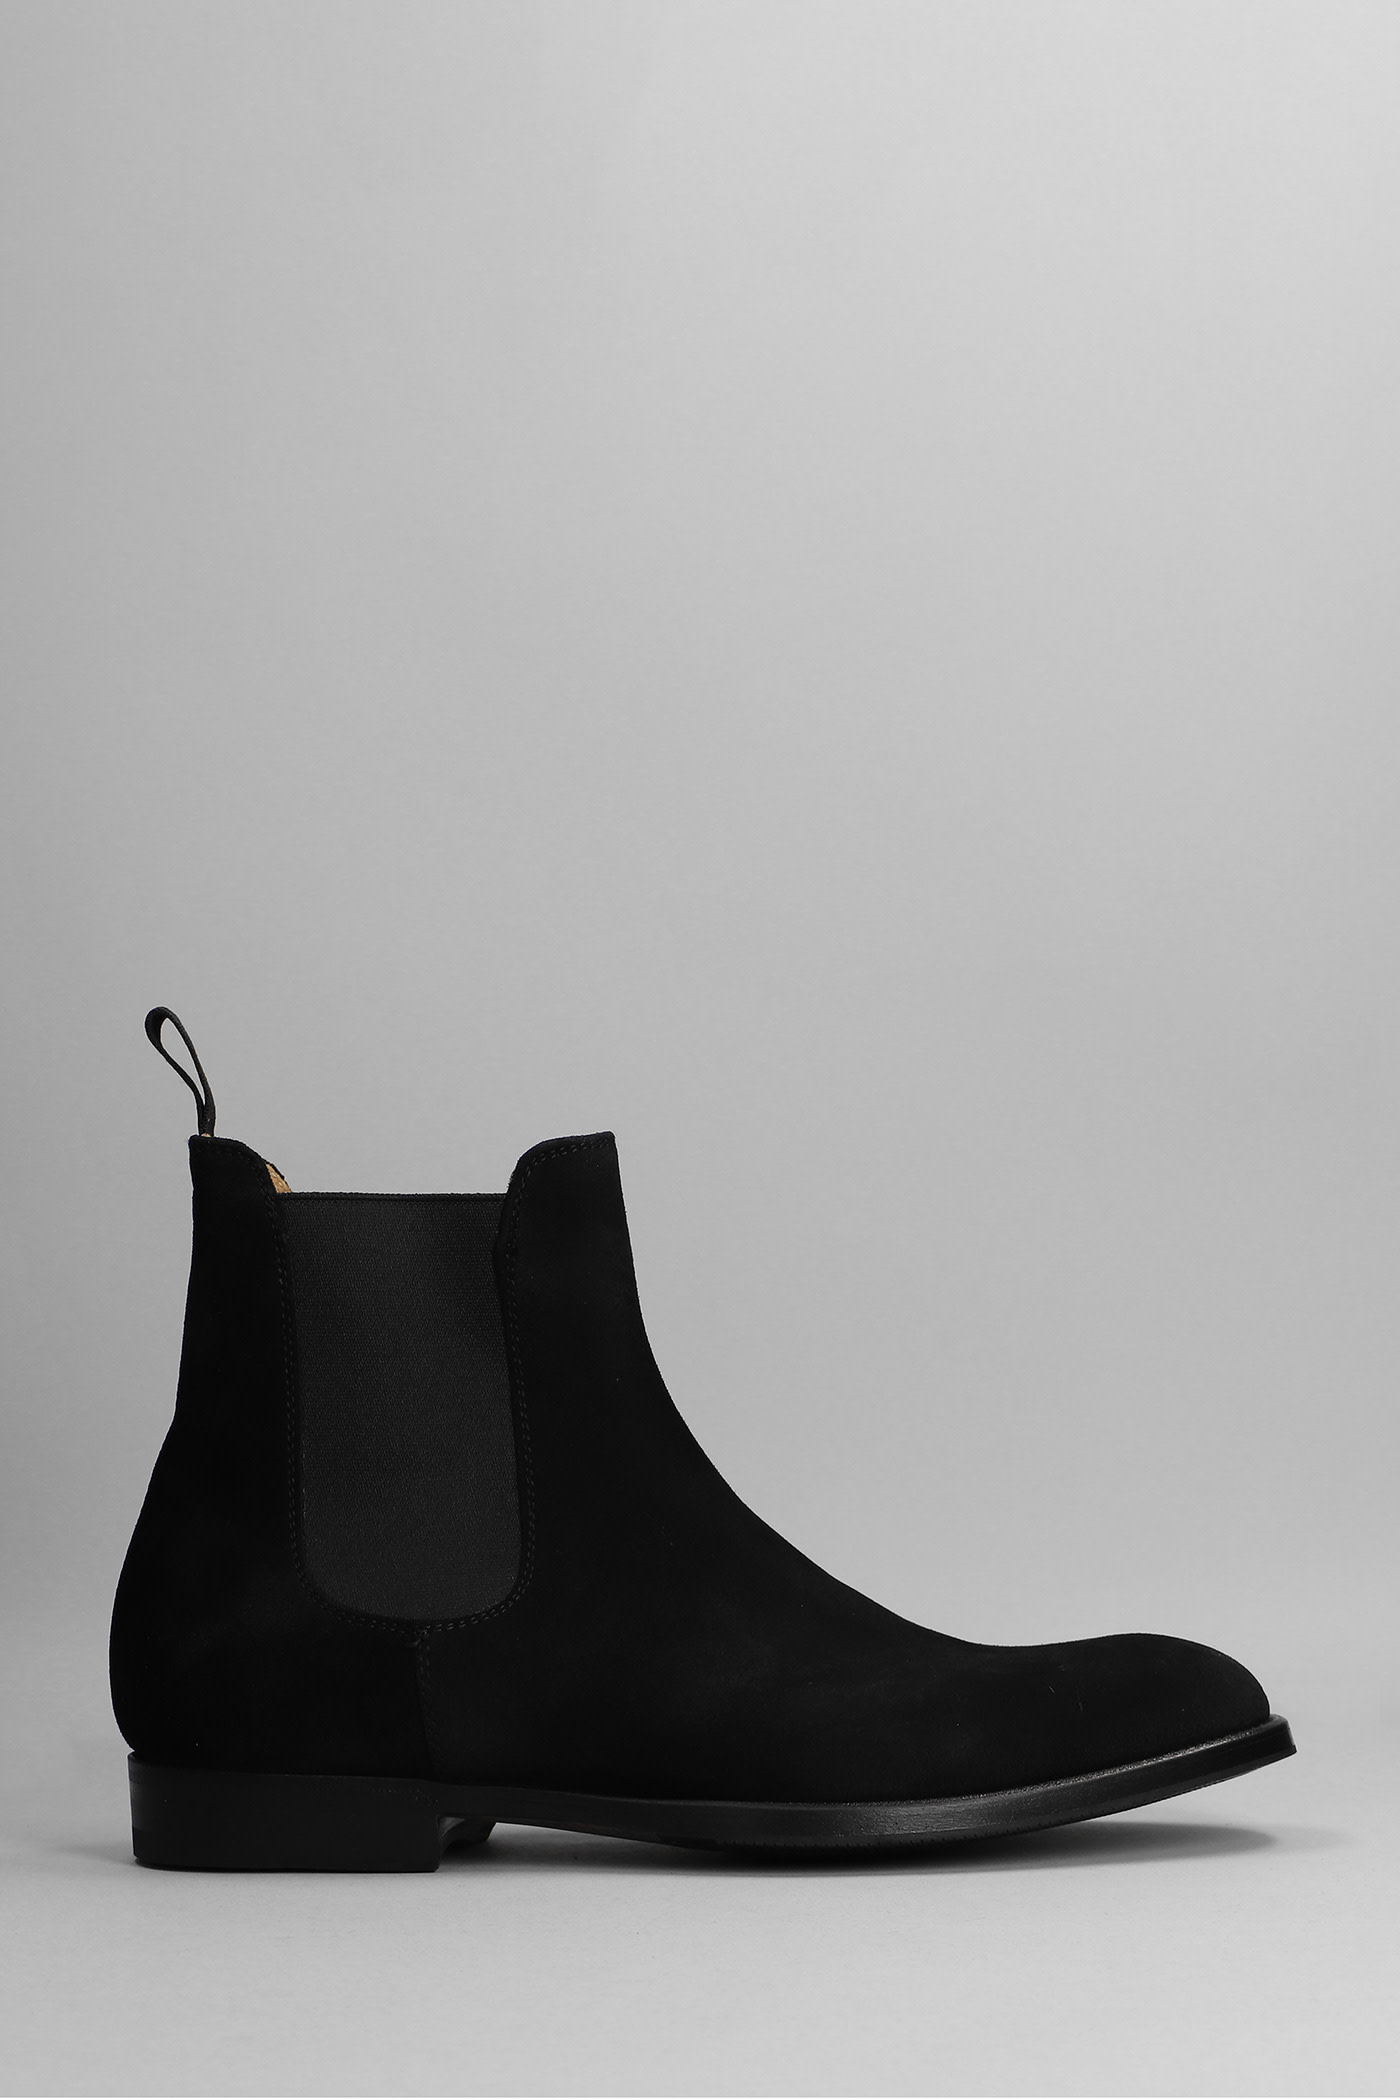 Green George Low Heels Ankle Boots In Black Suede